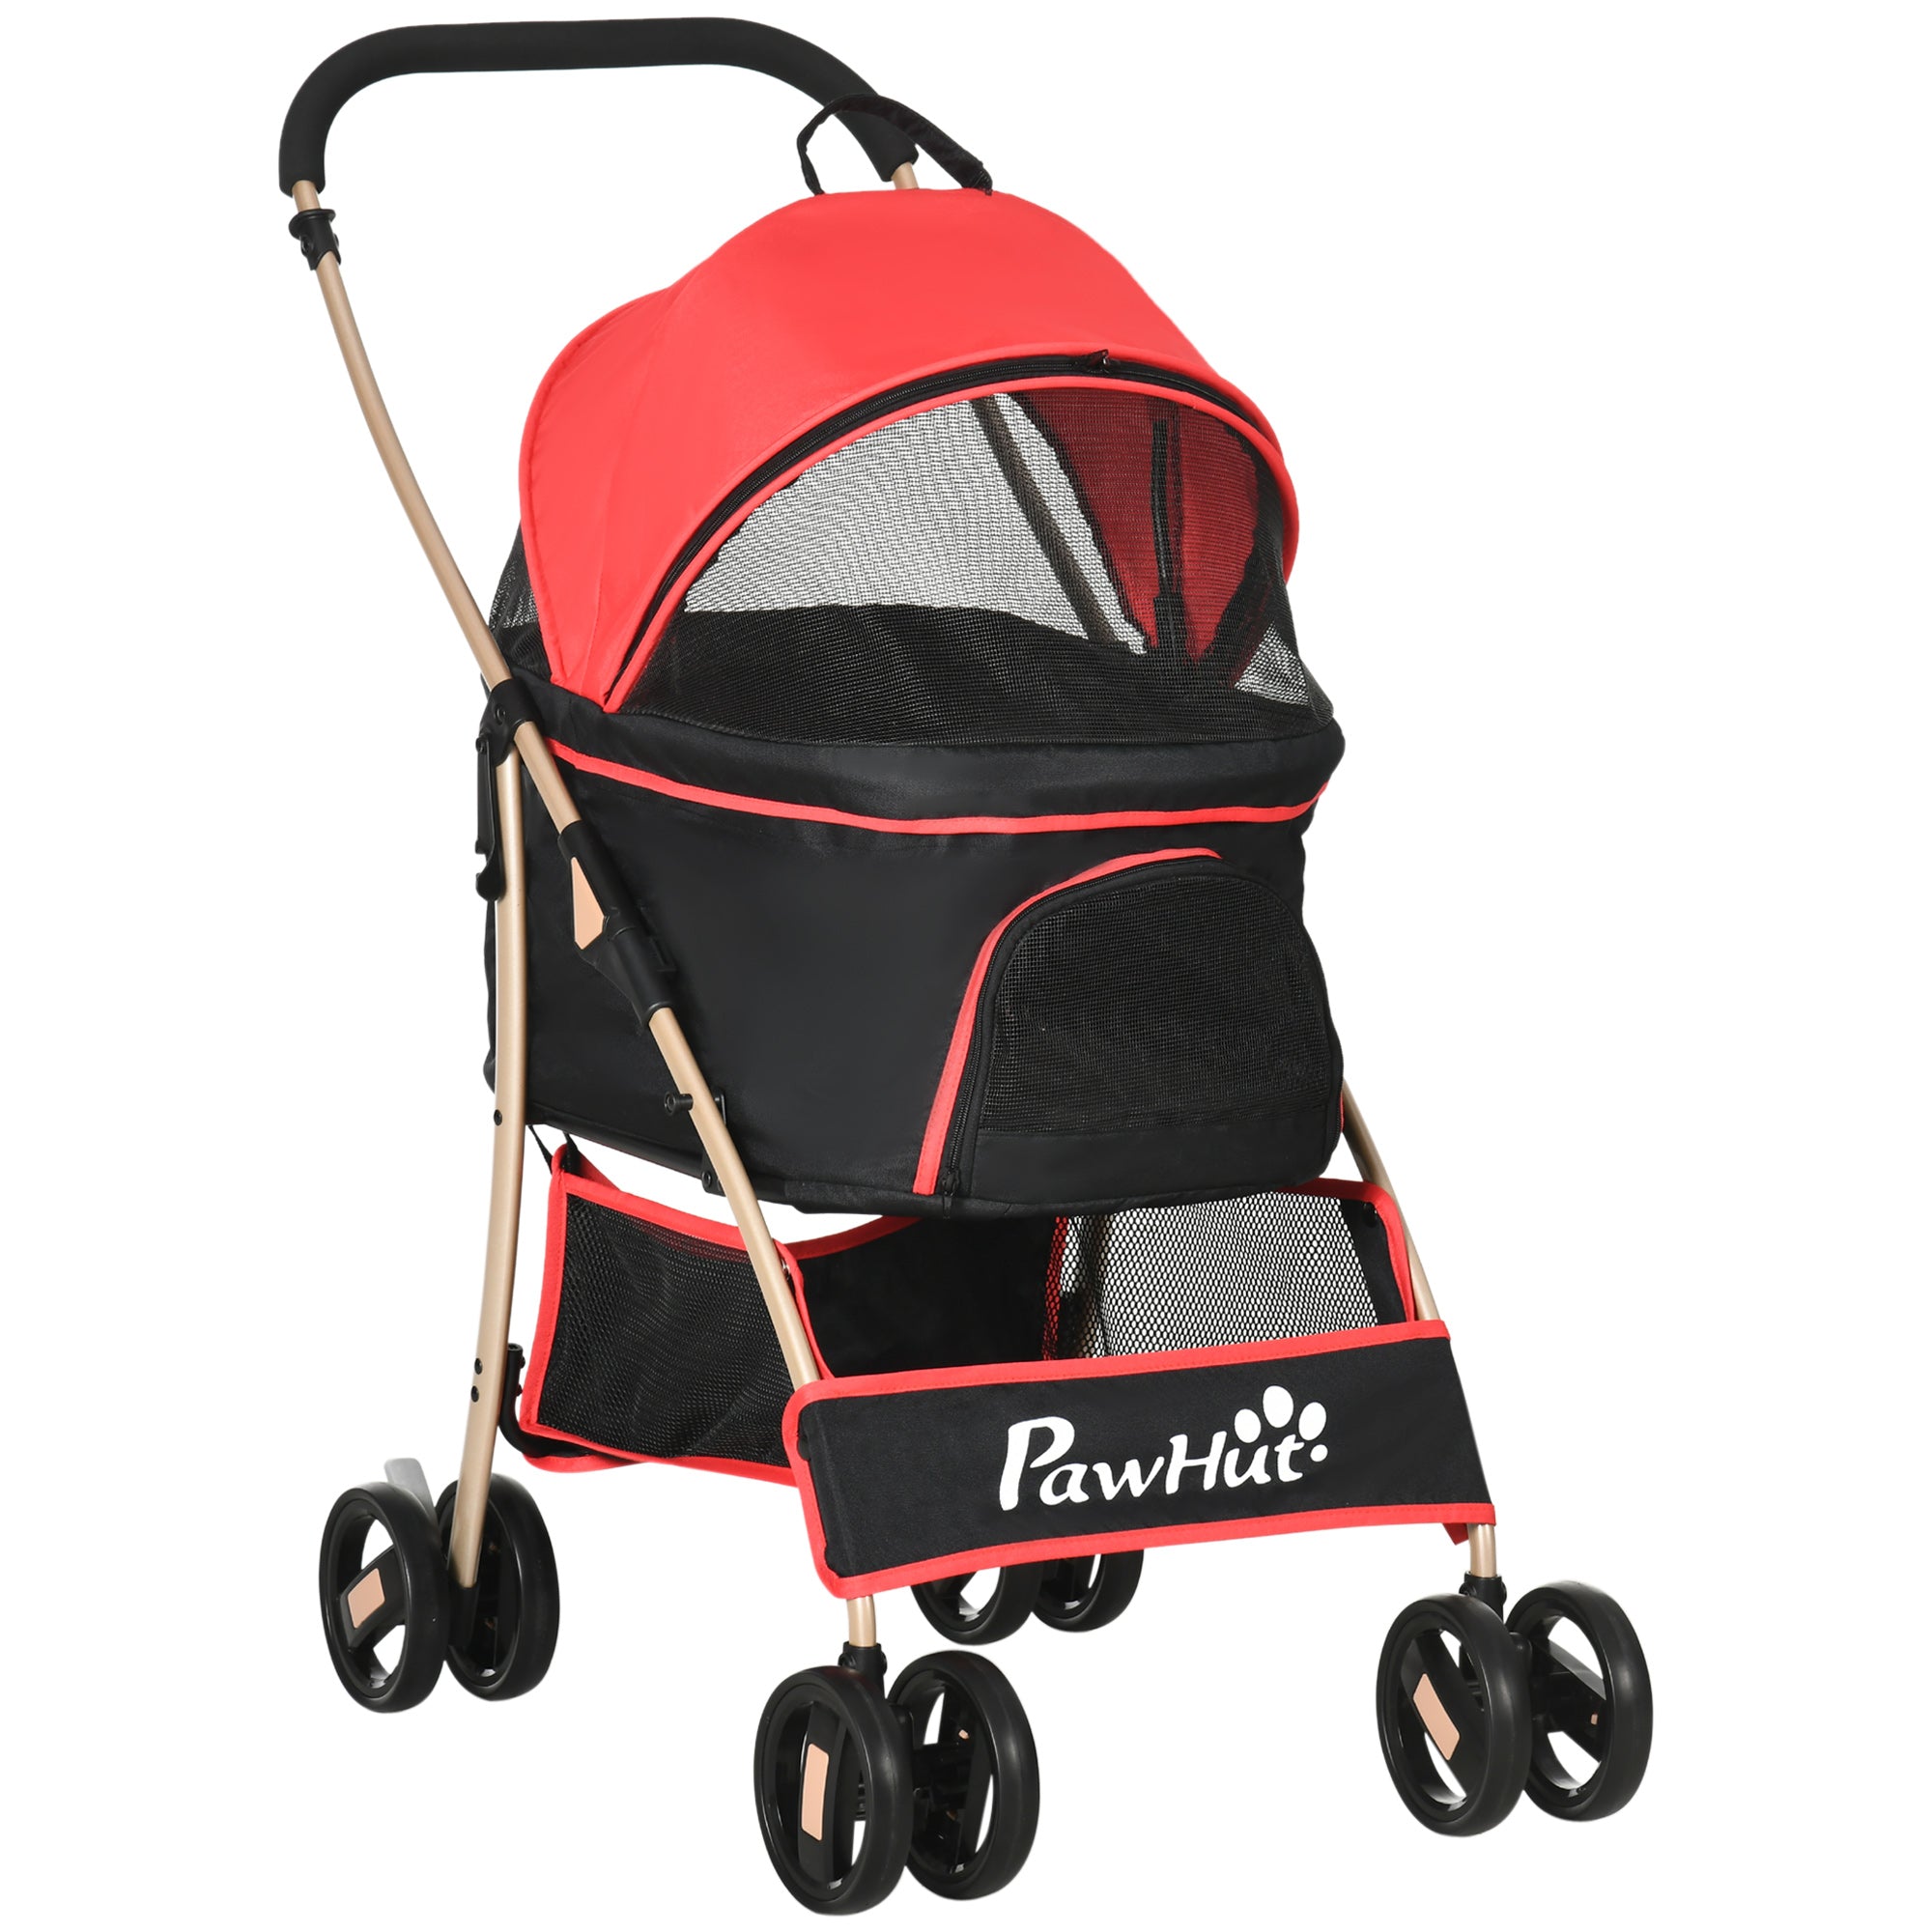 PawHut 3 In 1 Pet Stroller - Detachable Dog Cat Travel Carriage - Red  | TJ Hughes